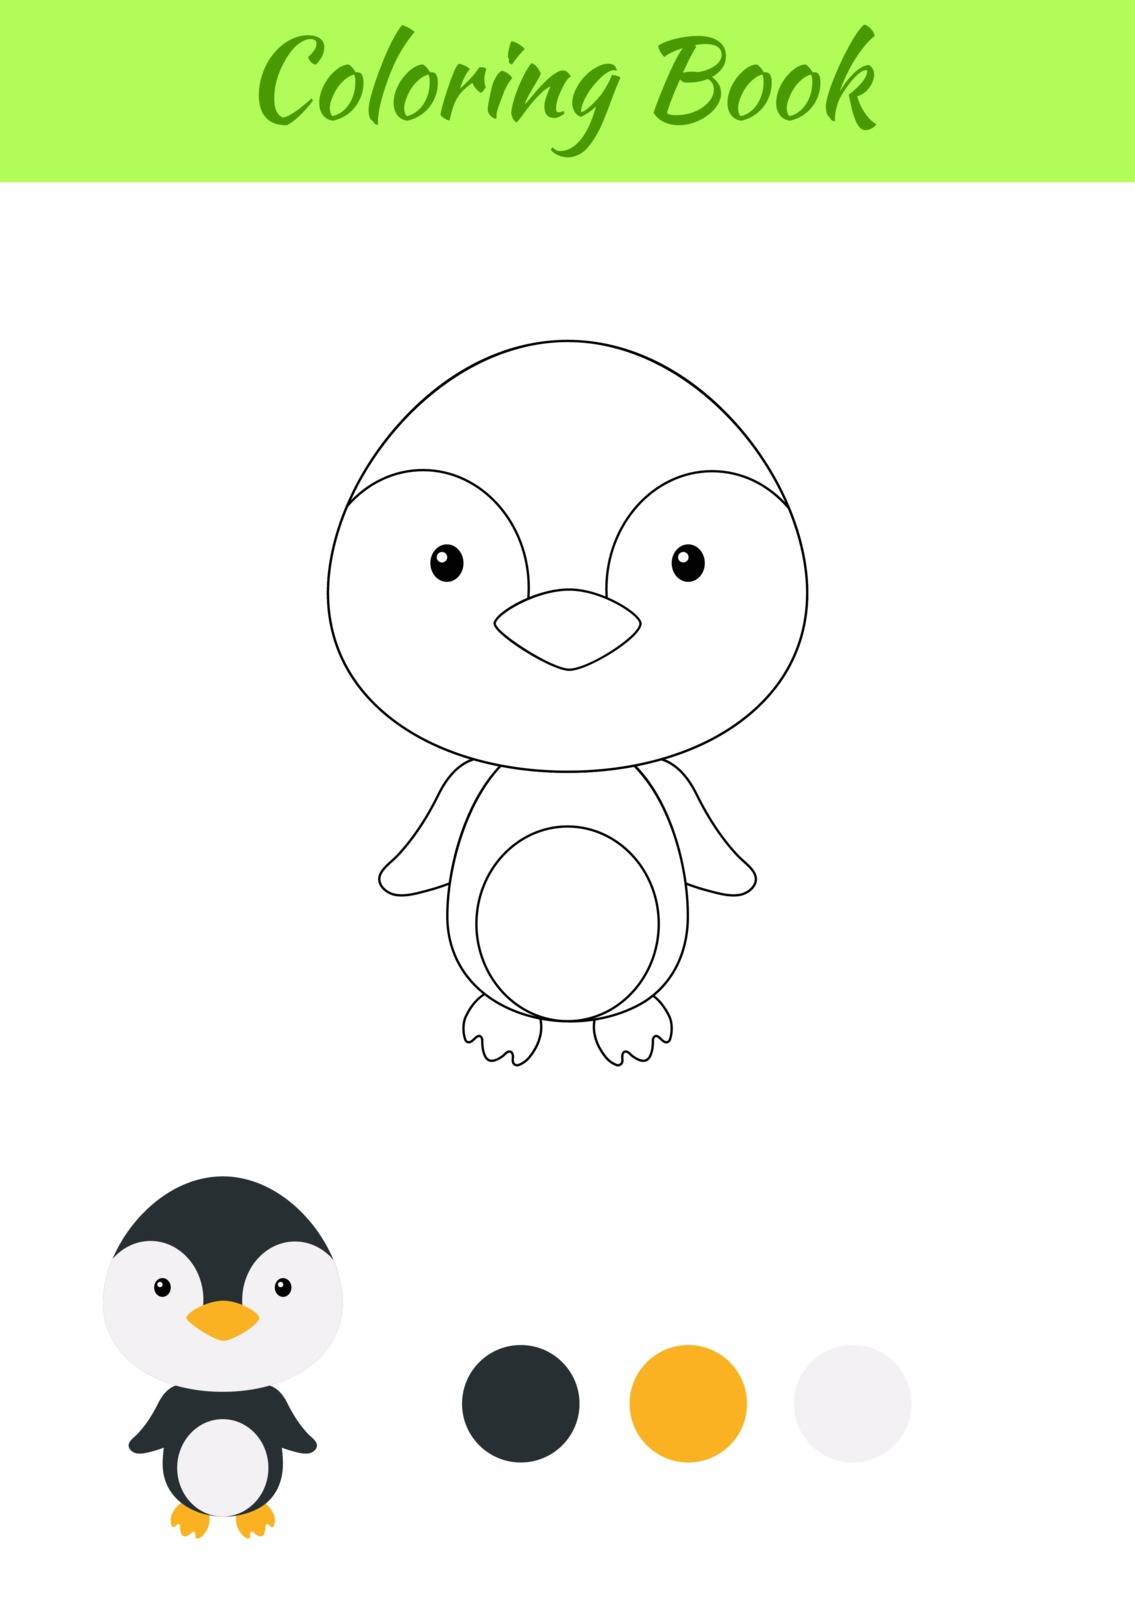 Coloring page happy little baby penguin. Printable coloring book for kids. Educational activity for kindergarten and preschool with cute animal. Flat cartoon colorful vector illustration.